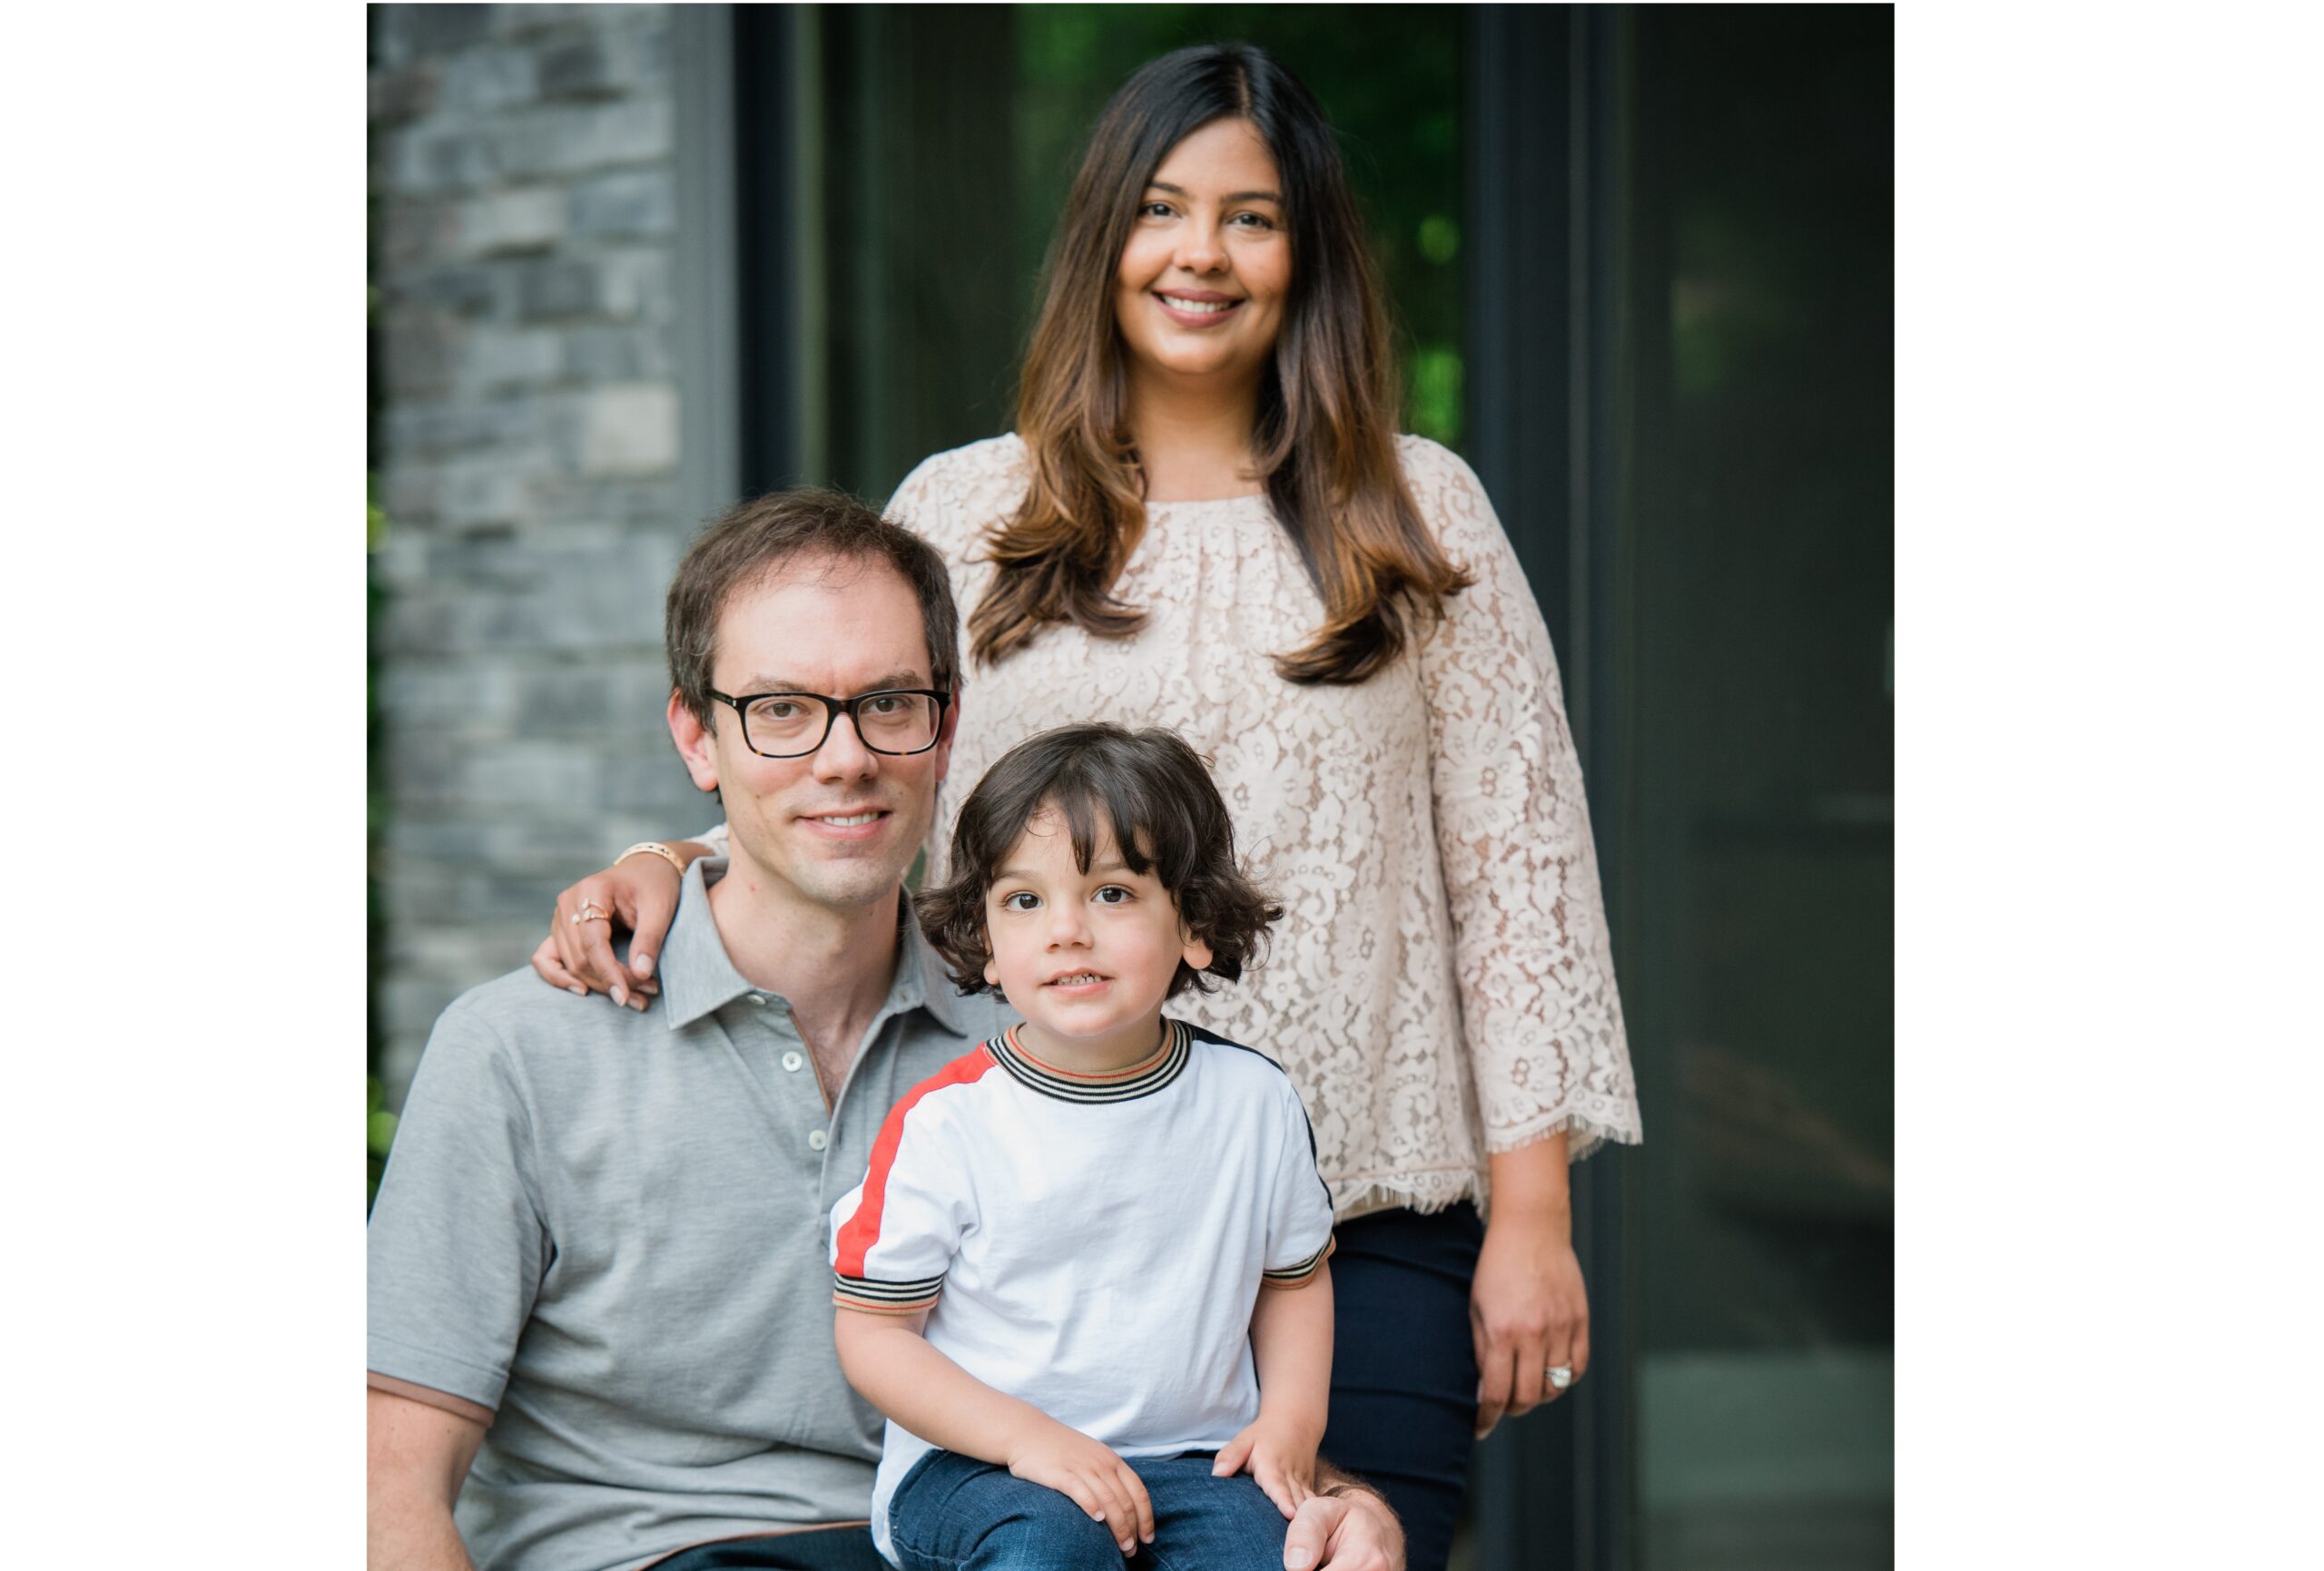 Sabina Vohra Miller and Craig Miller with their son Aavir, joined Anishnawbe Health’s circle of supporters this fall.